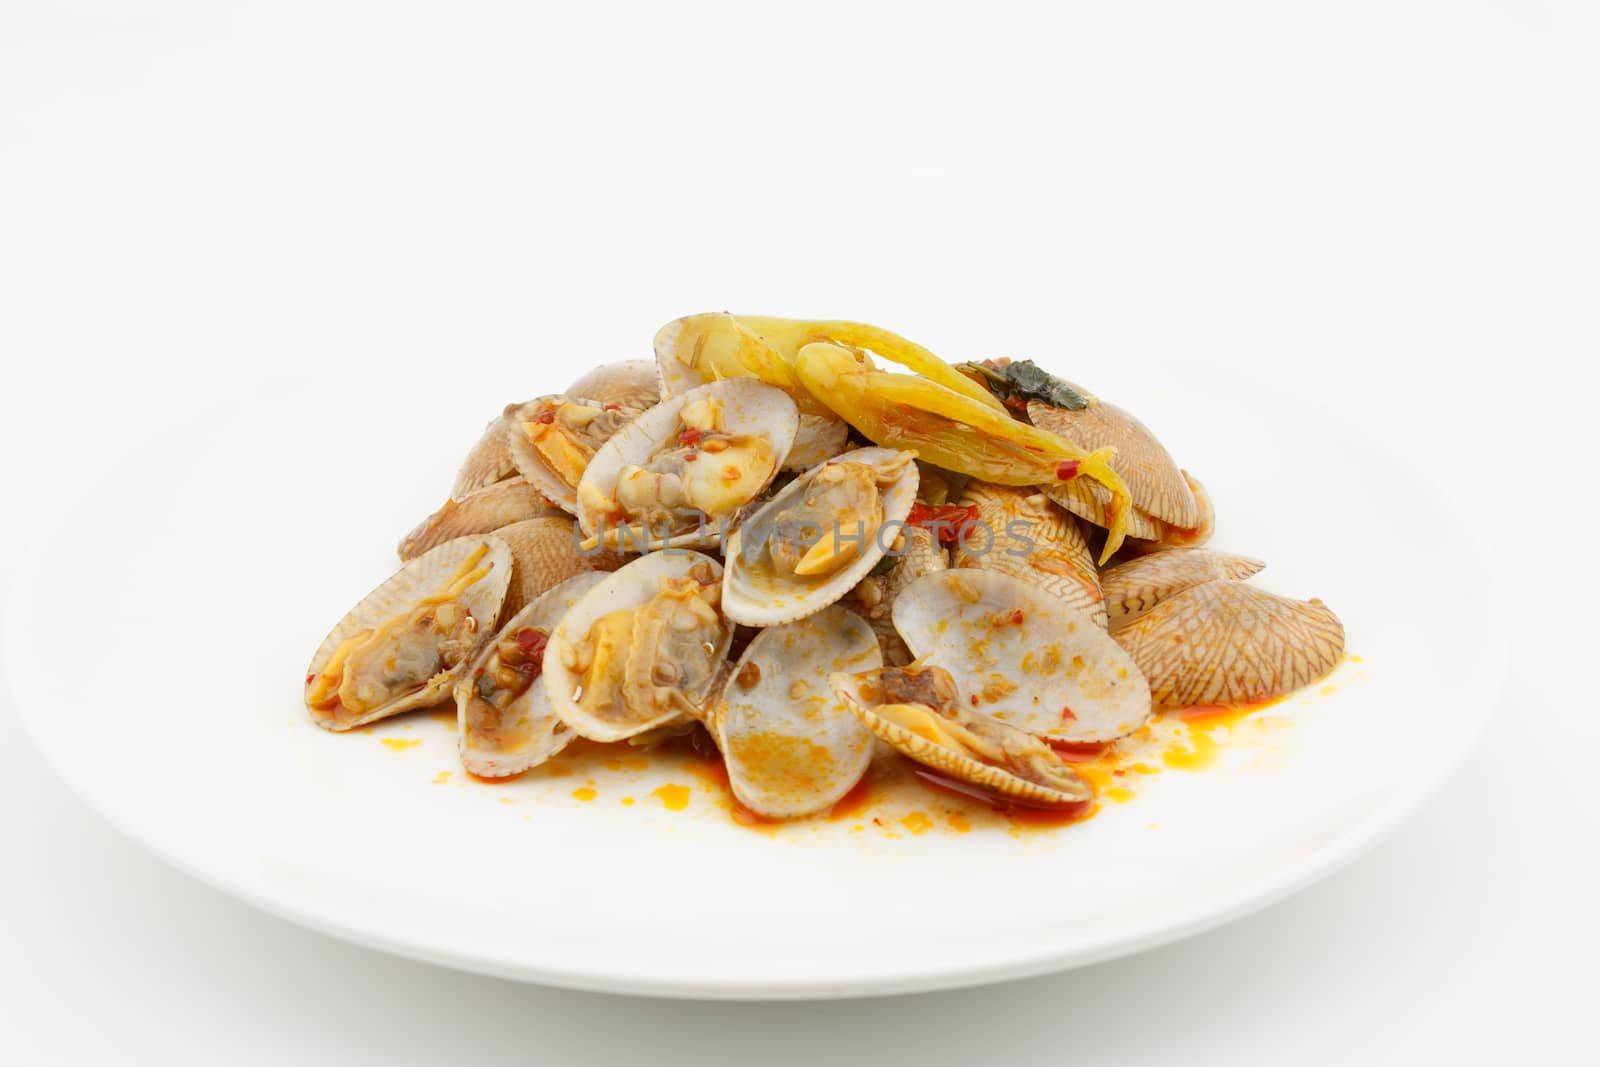 stir fried clams with roasted chili paste,thai food by vitawin